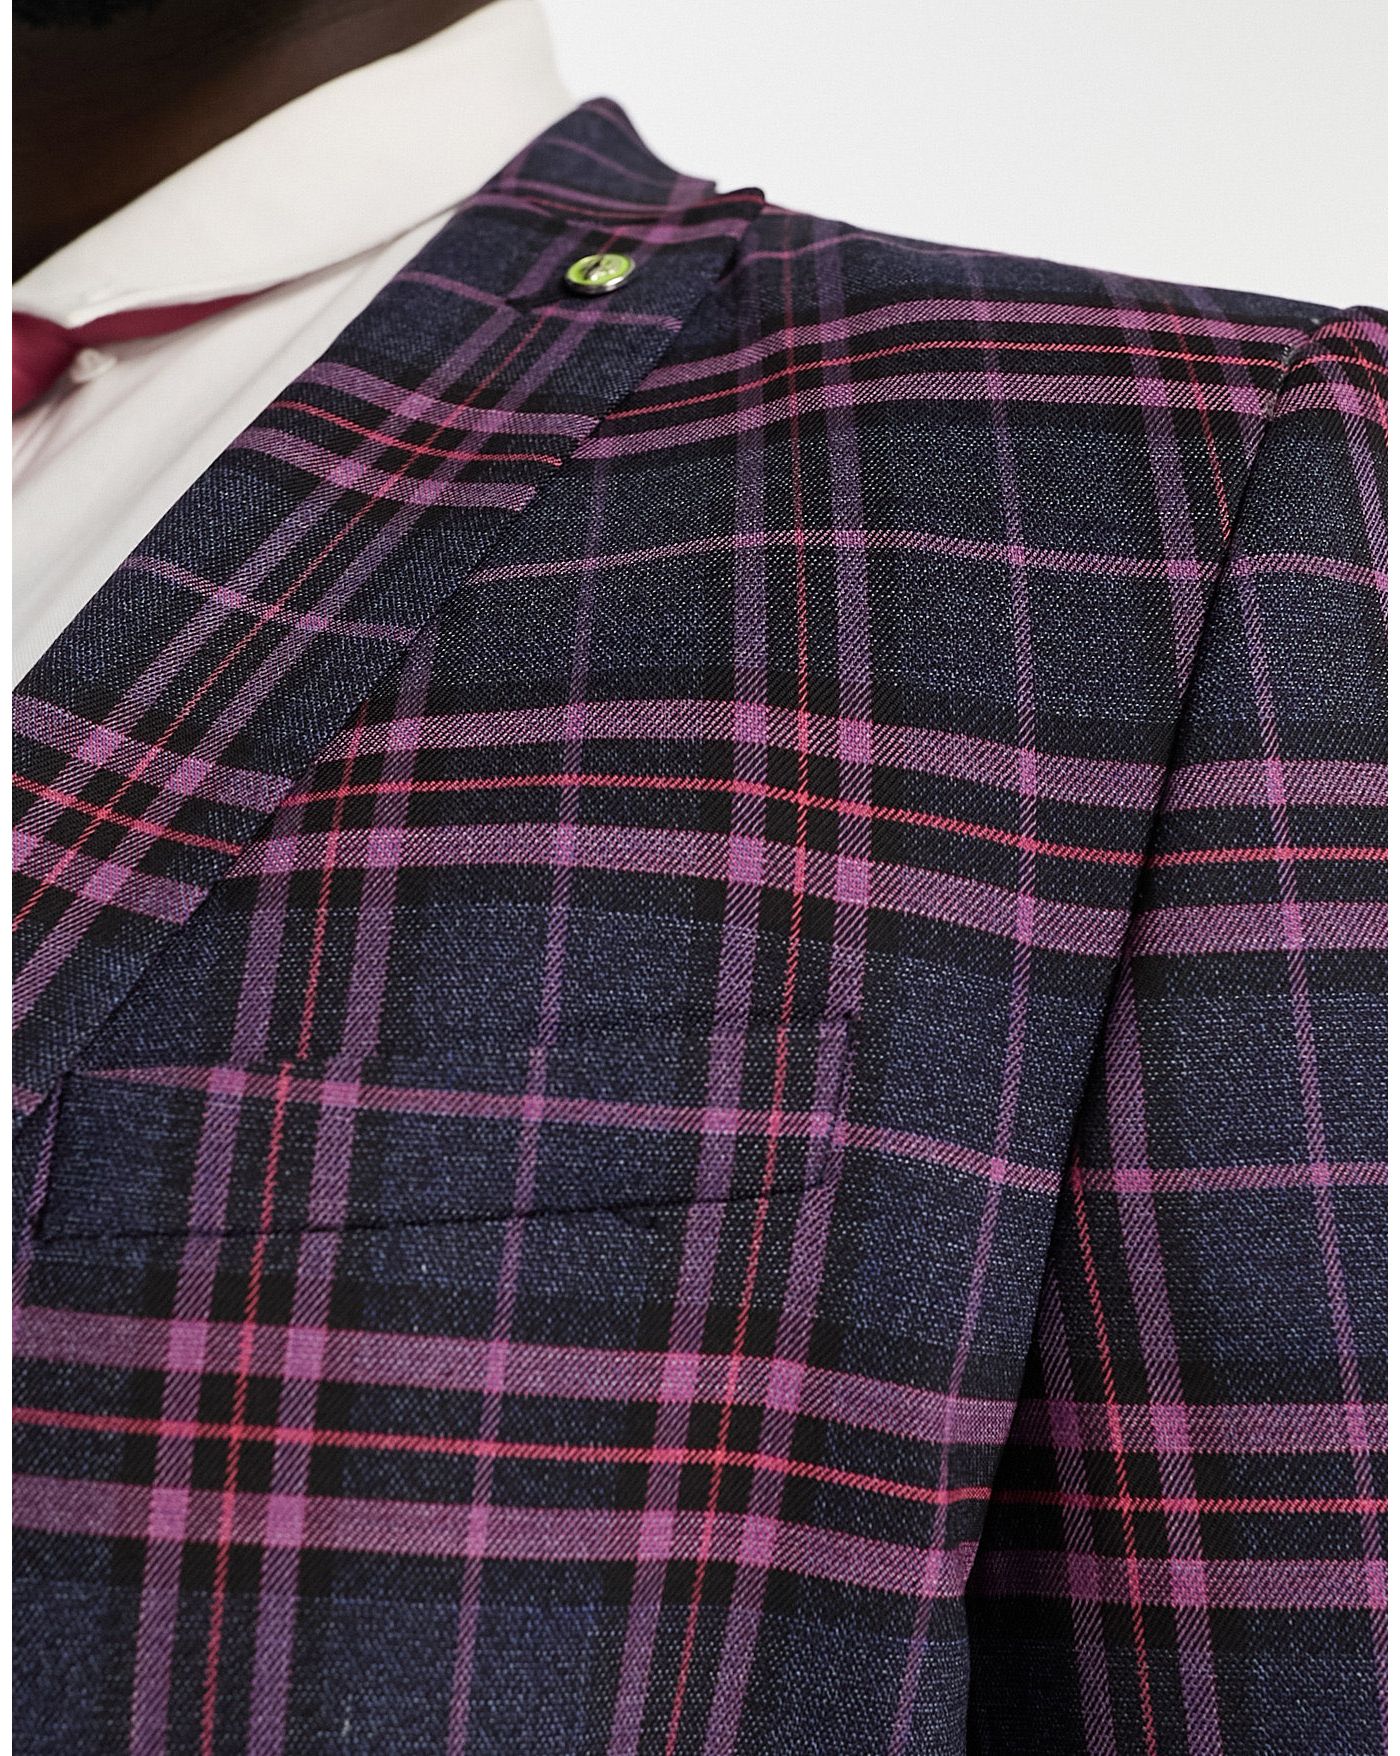 Twisted Tailor Plus ladd suit jacket in navy and pink tartan check